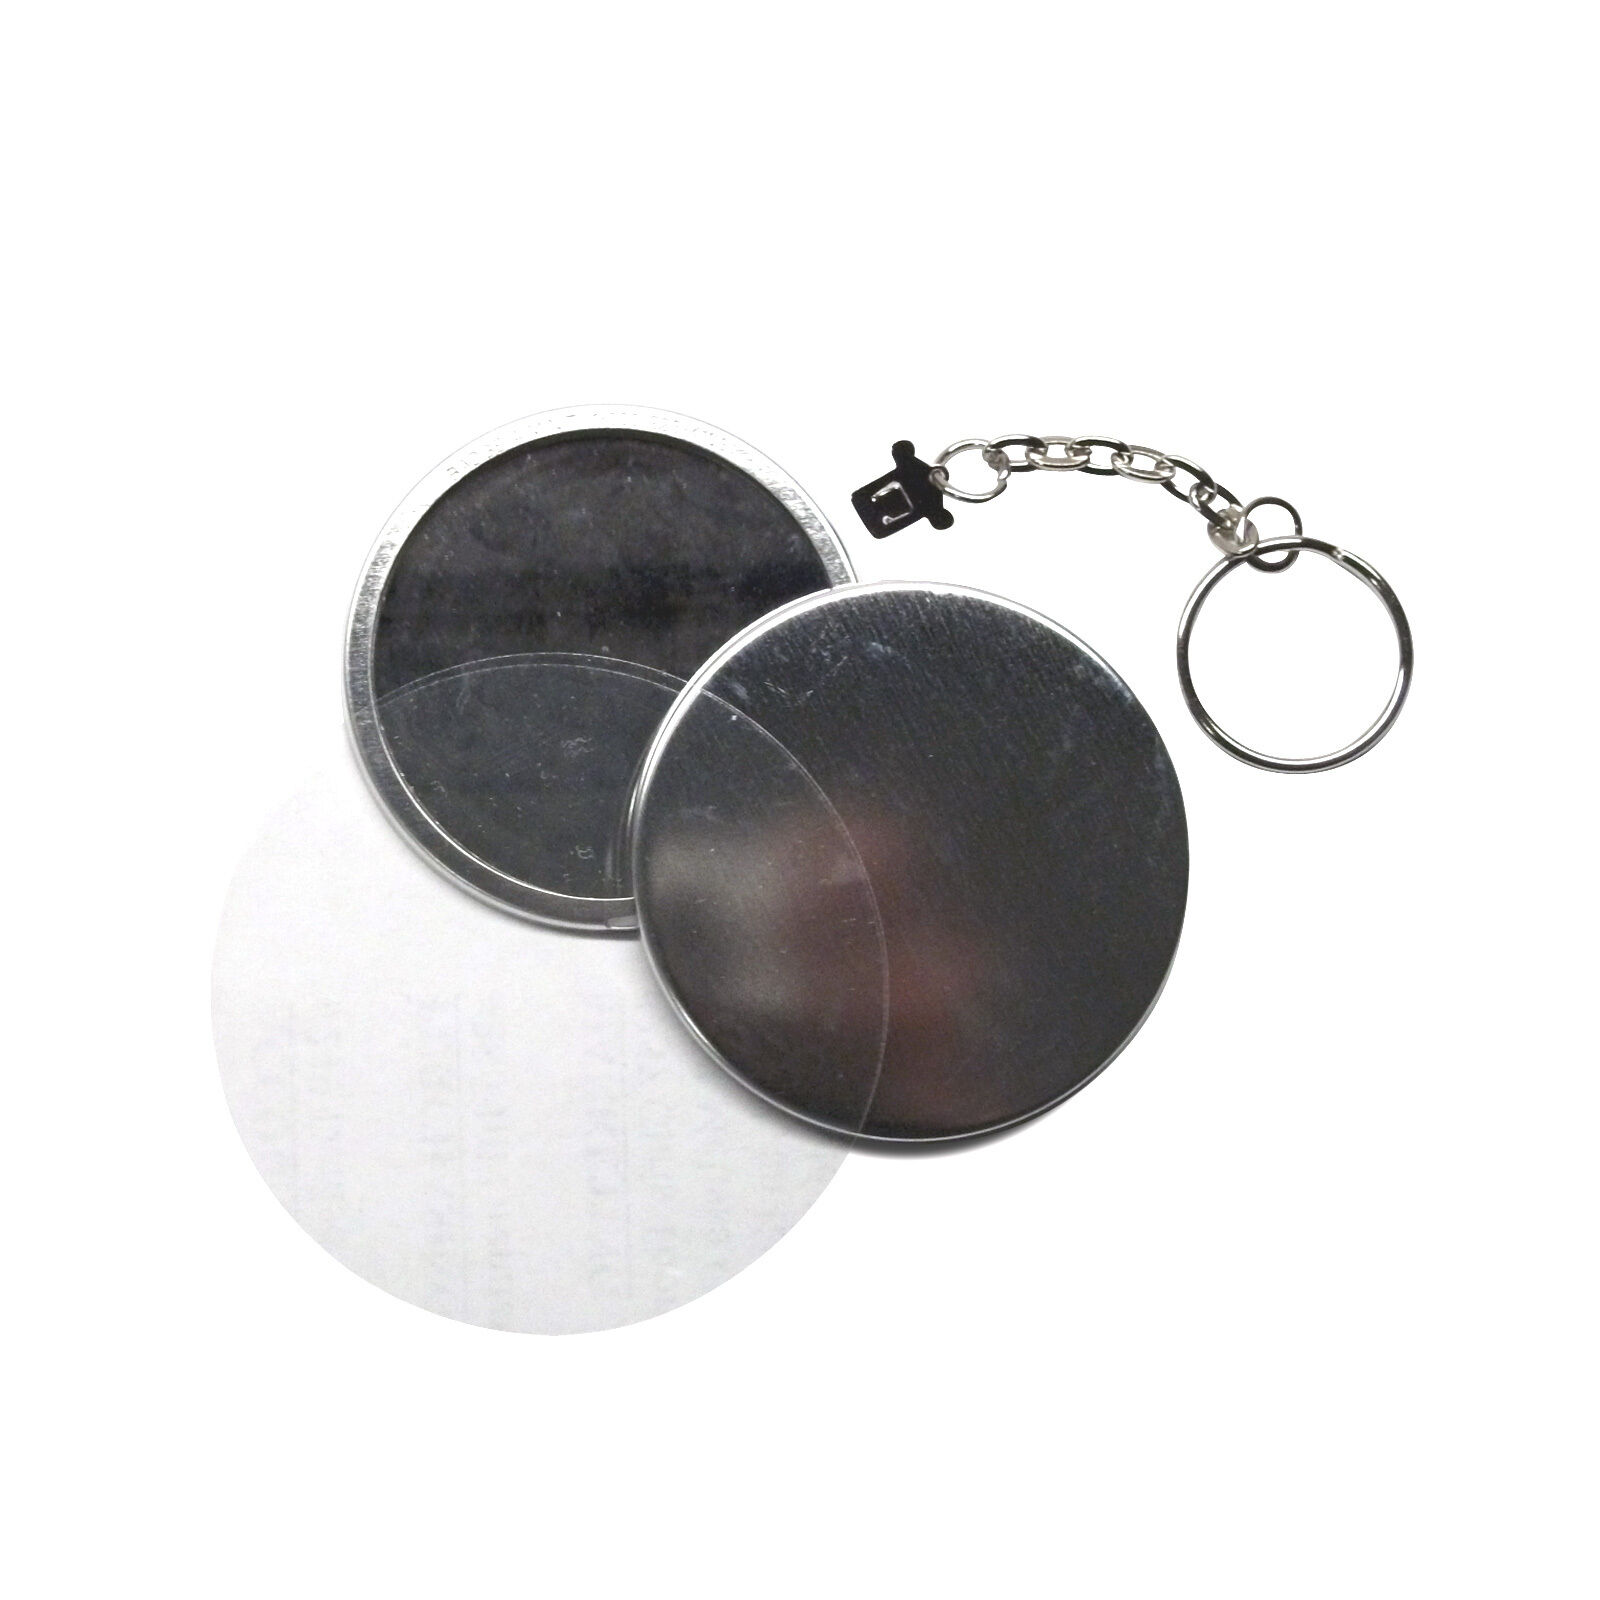 Badge-A-Minit 250-2 1/4" MirrorBack Key Chain Buttons #4500